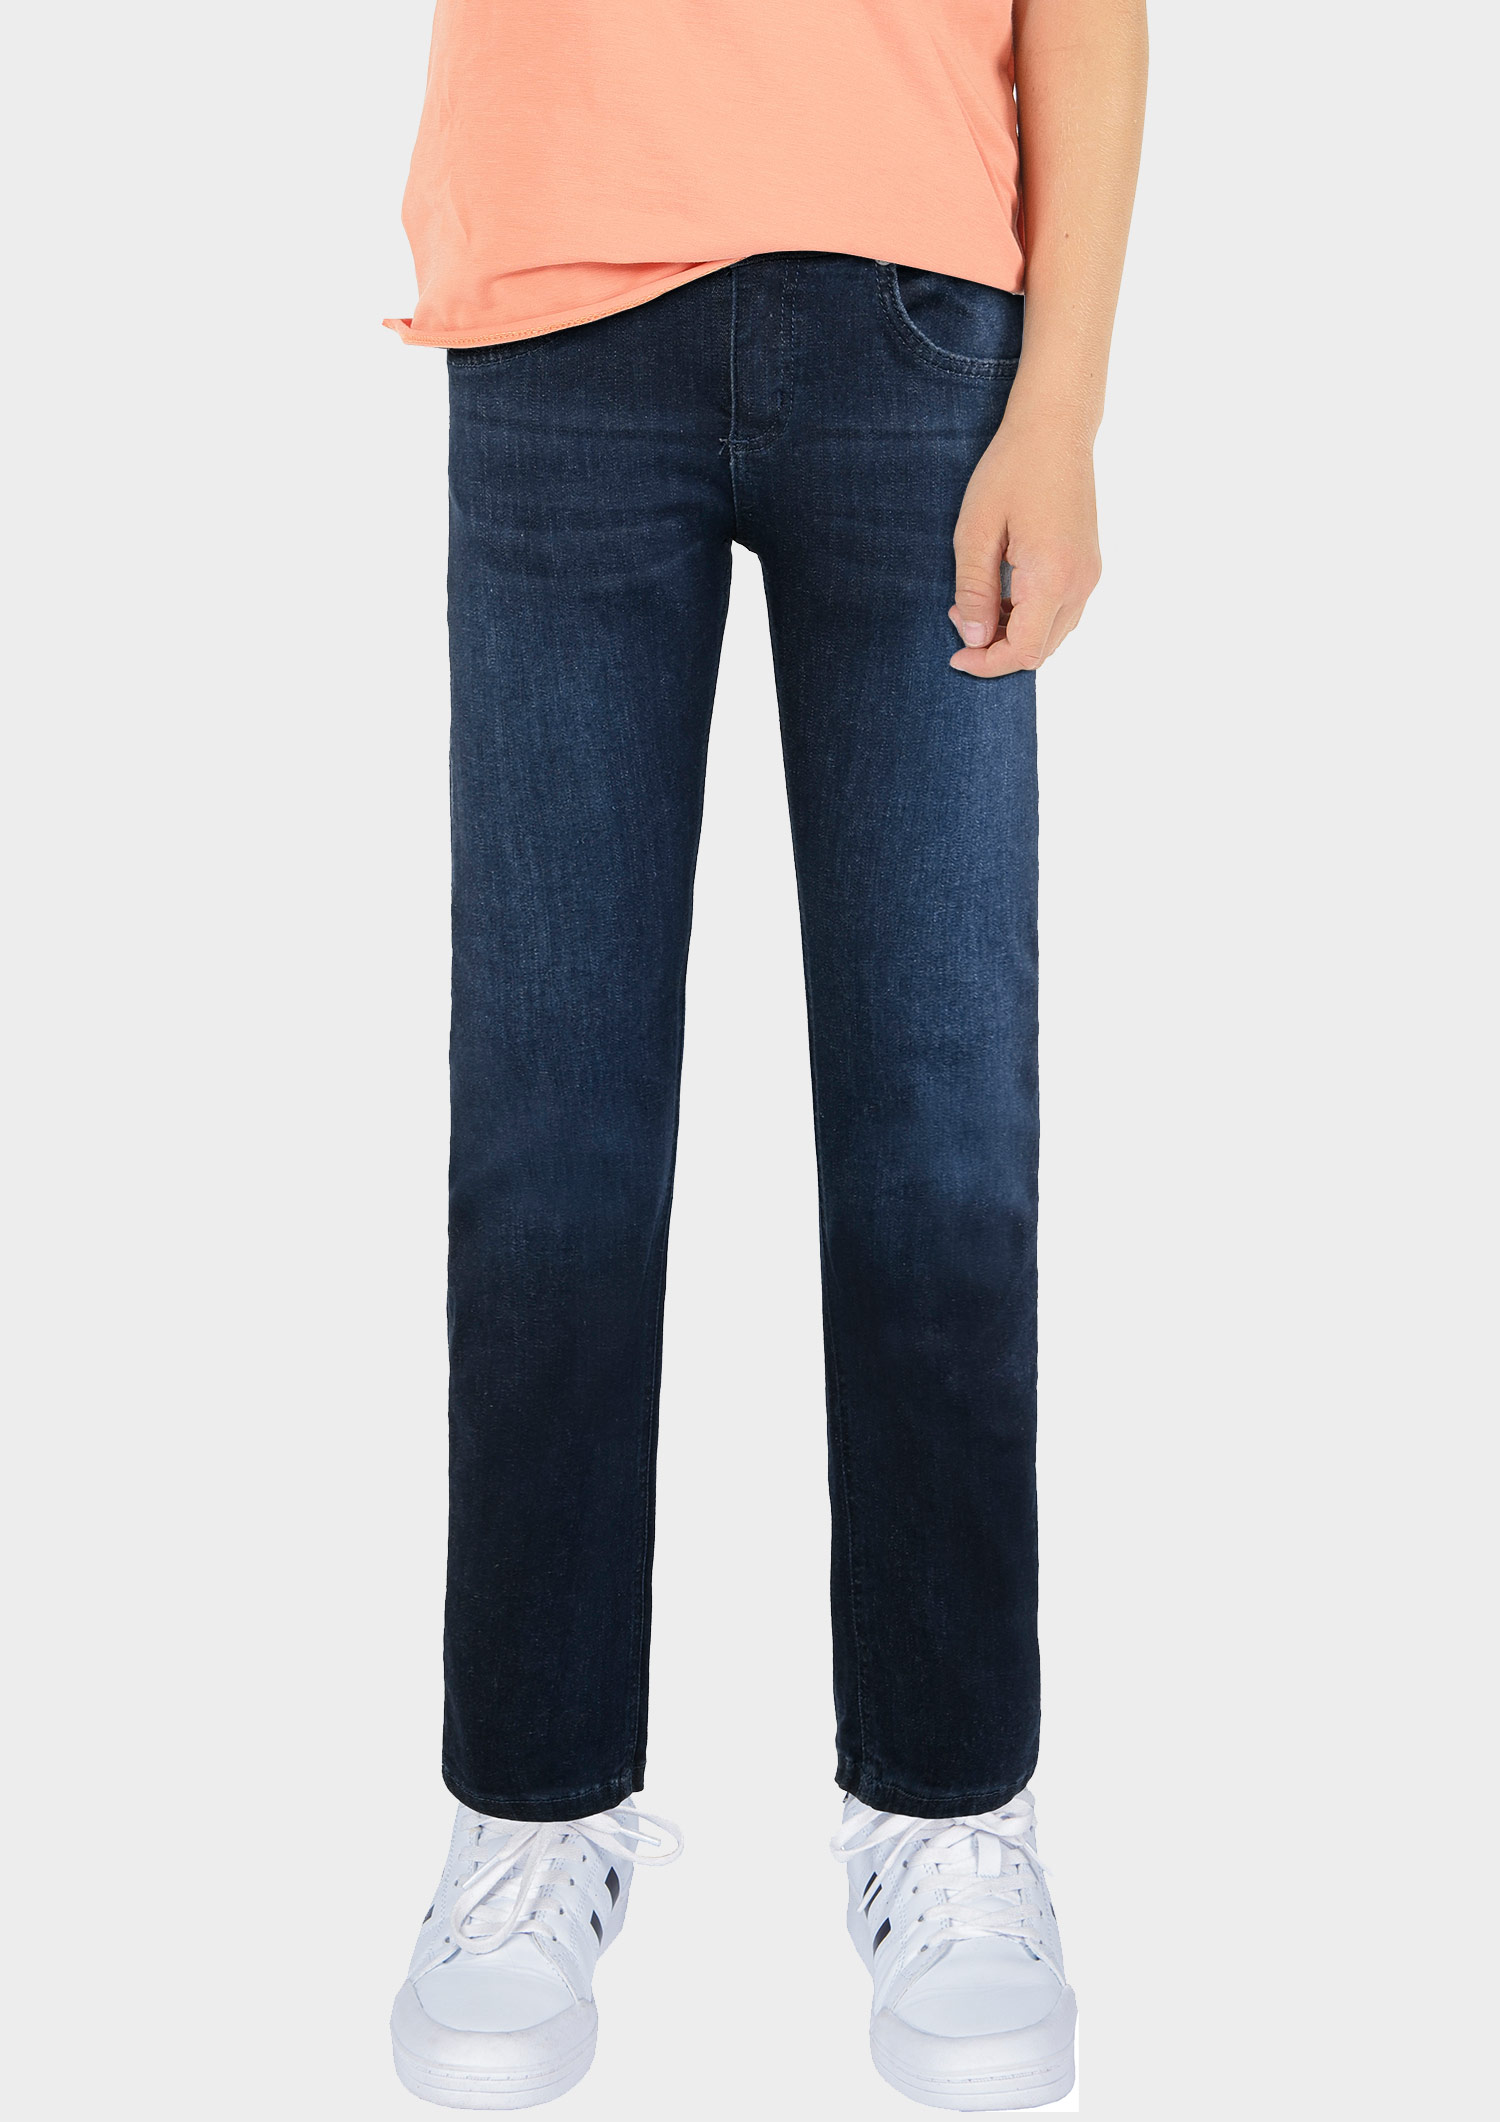 2902-JRNY Relaxed Fit Jean Boys, Sustainable, available in Normal